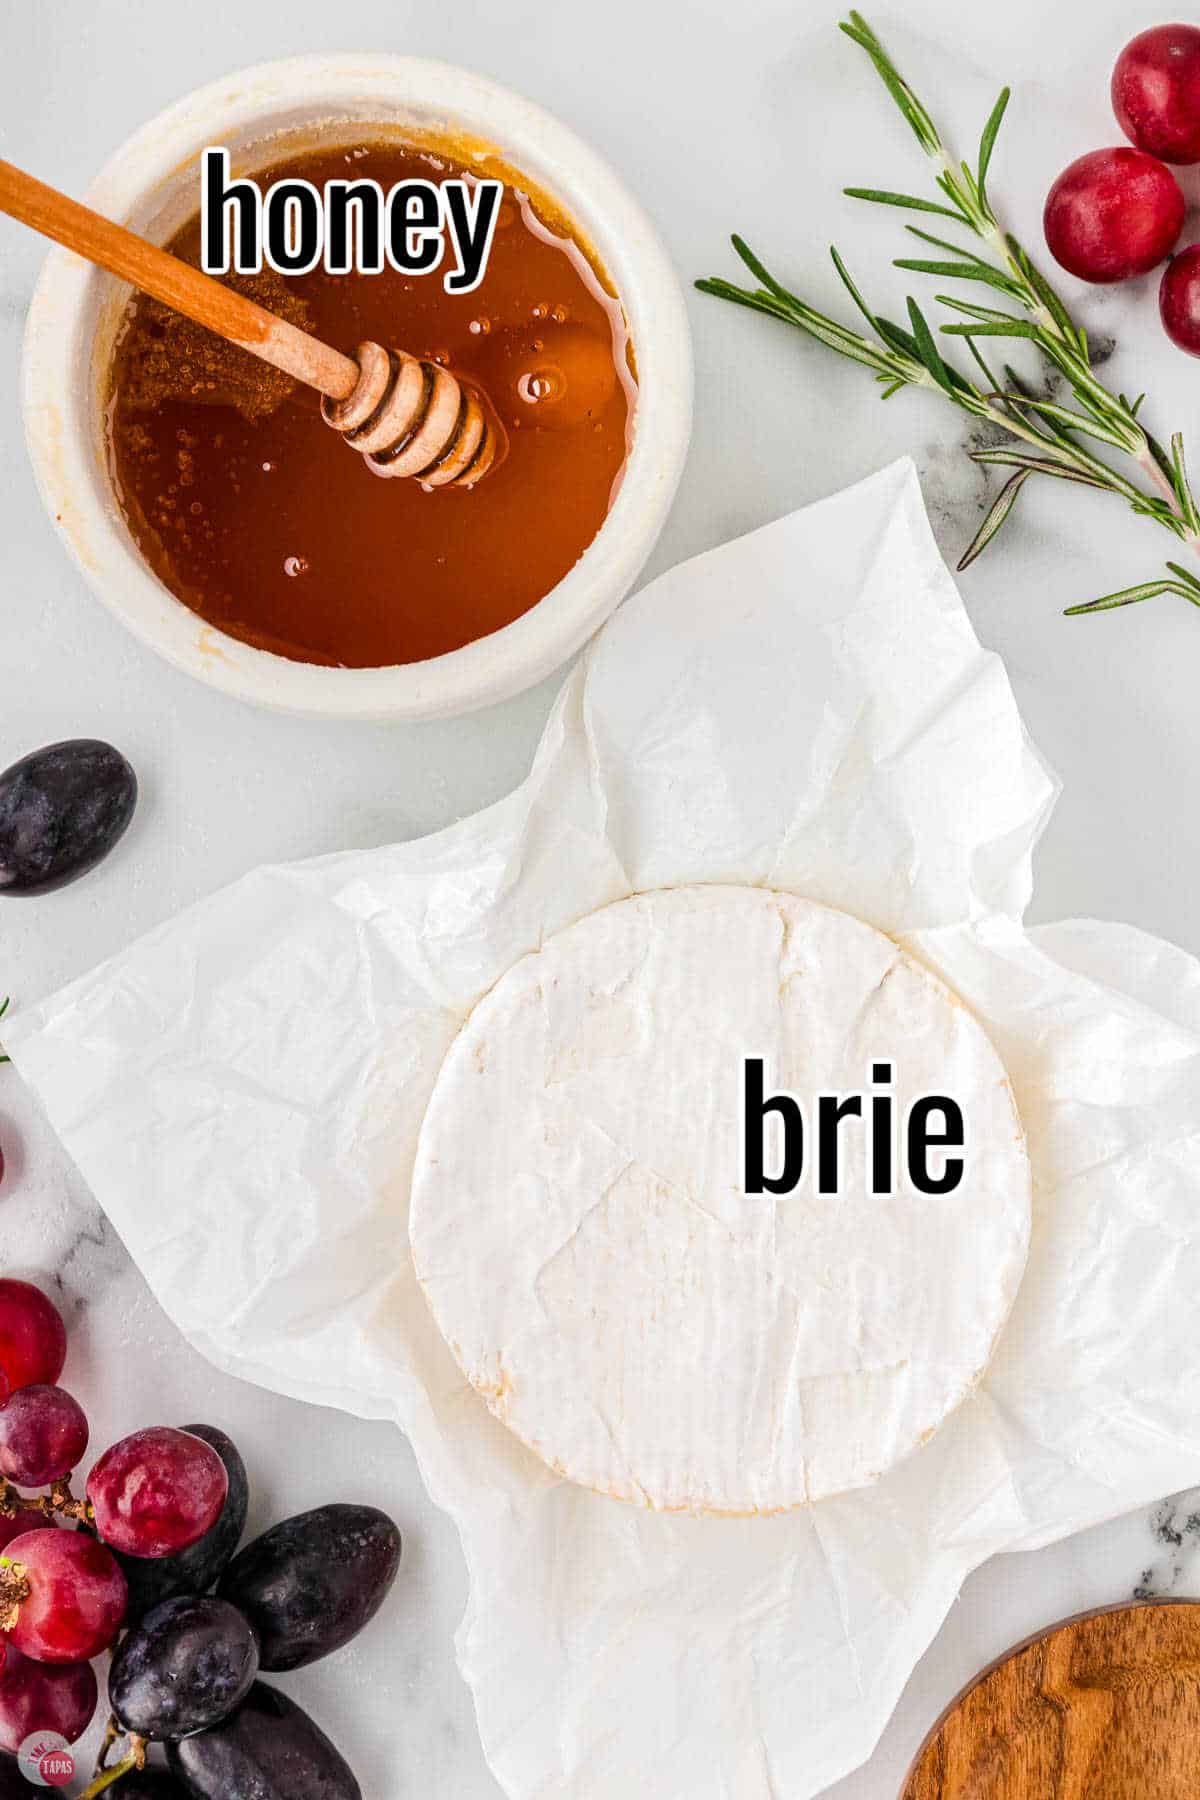 brie wheel with dish of honey